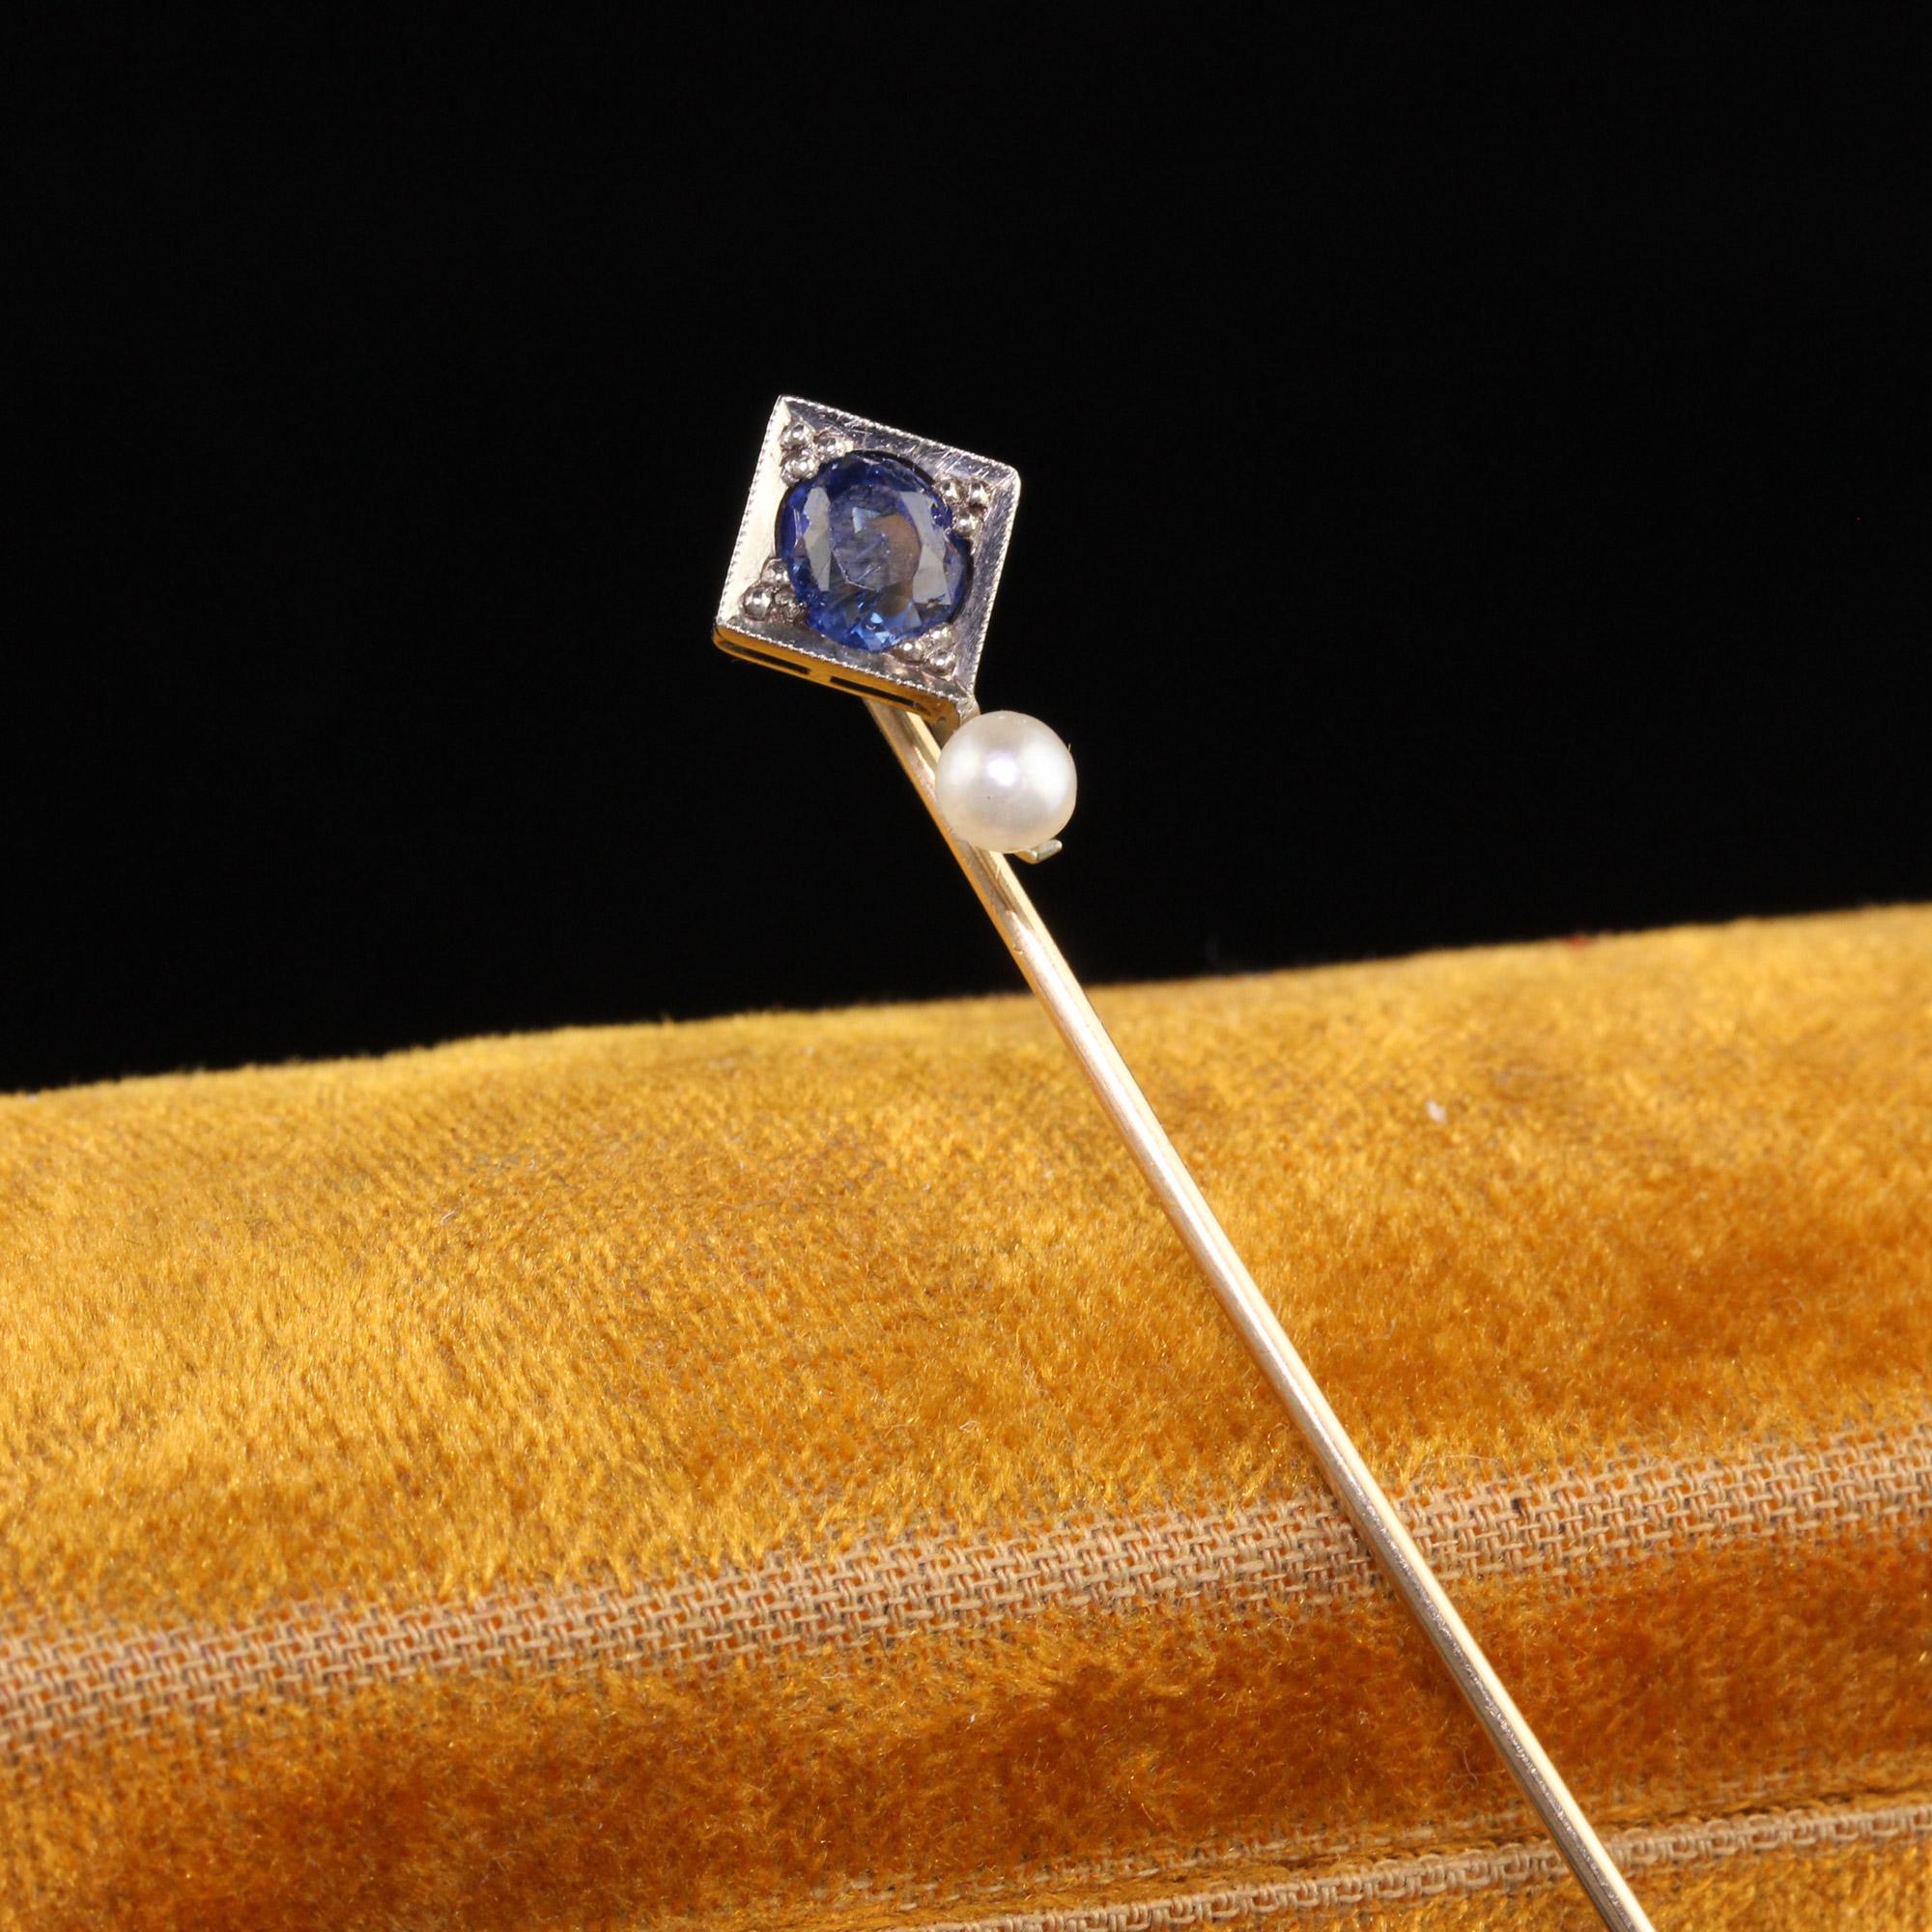 Beautiful Antique Art Deco 14K/18K Two Tone Gold Ceylon Sapphire and Pearl Stick Pin - GIA. This beautiful stick pin is crafted in 14k yellow gold and 18k white gold where the sapphire and pearl are set. The pin has a ceylon sapphire that has not